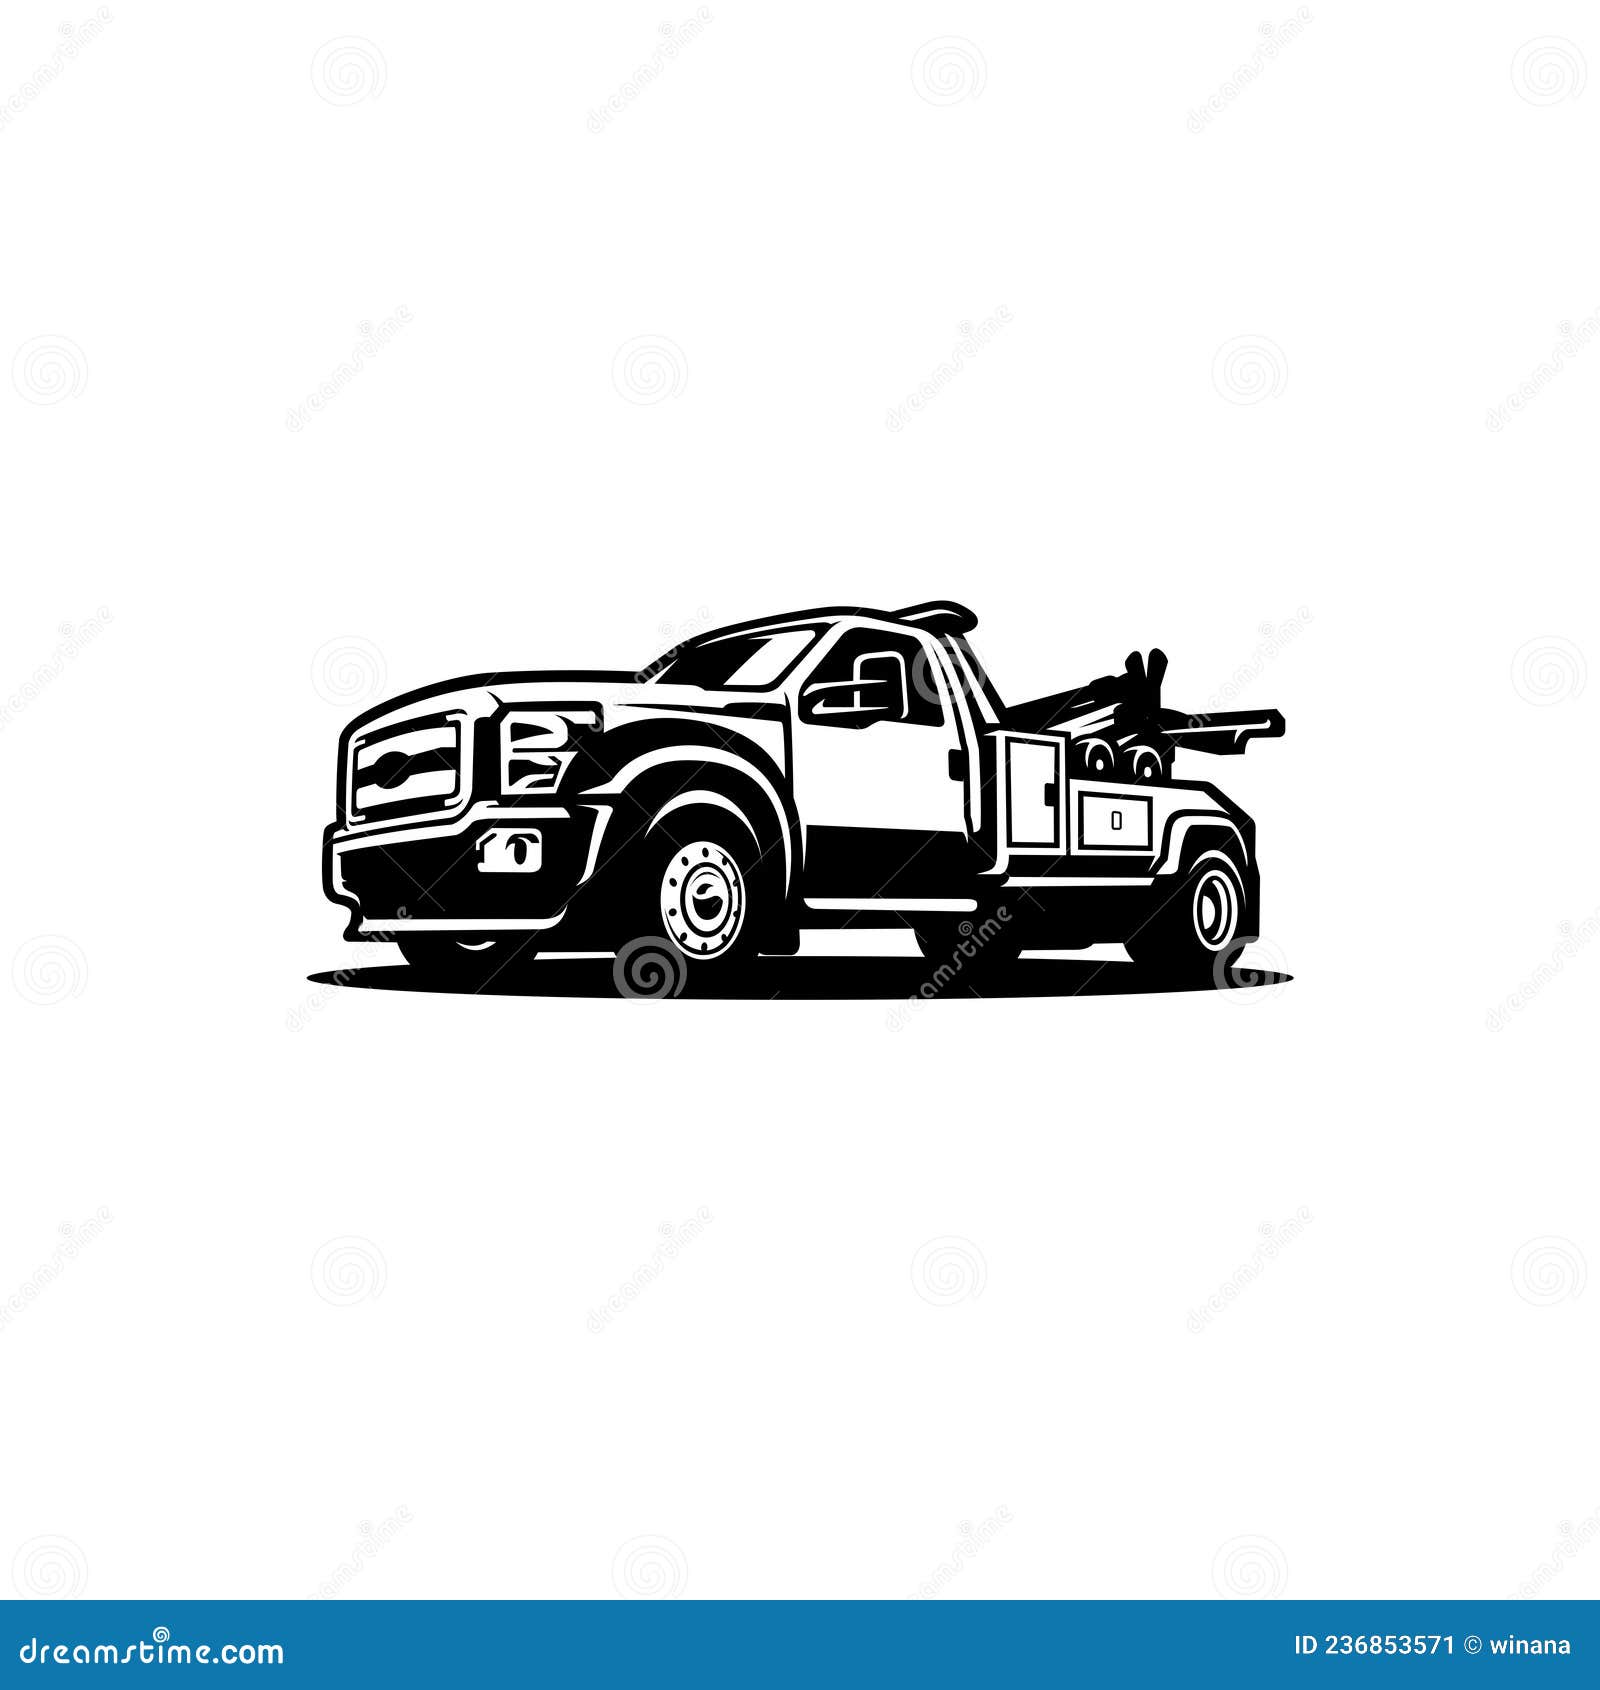 tow truck - towing truck - service truck 